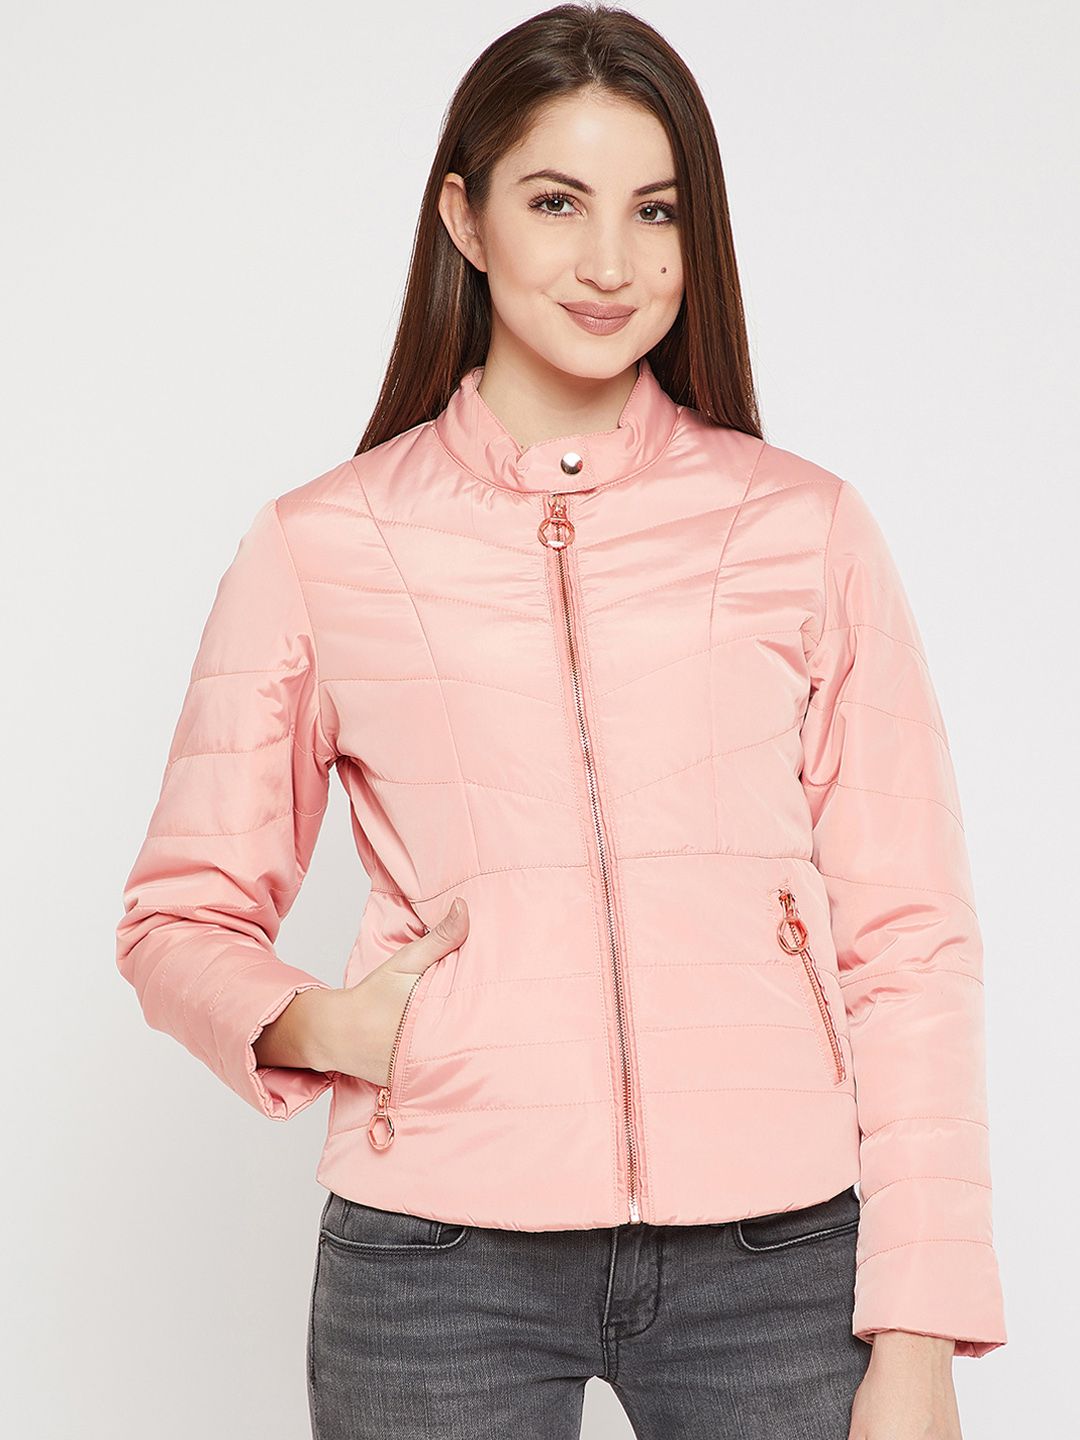 Marie Claire Women Peach-Coloured Solid Padded Jacket Price in India